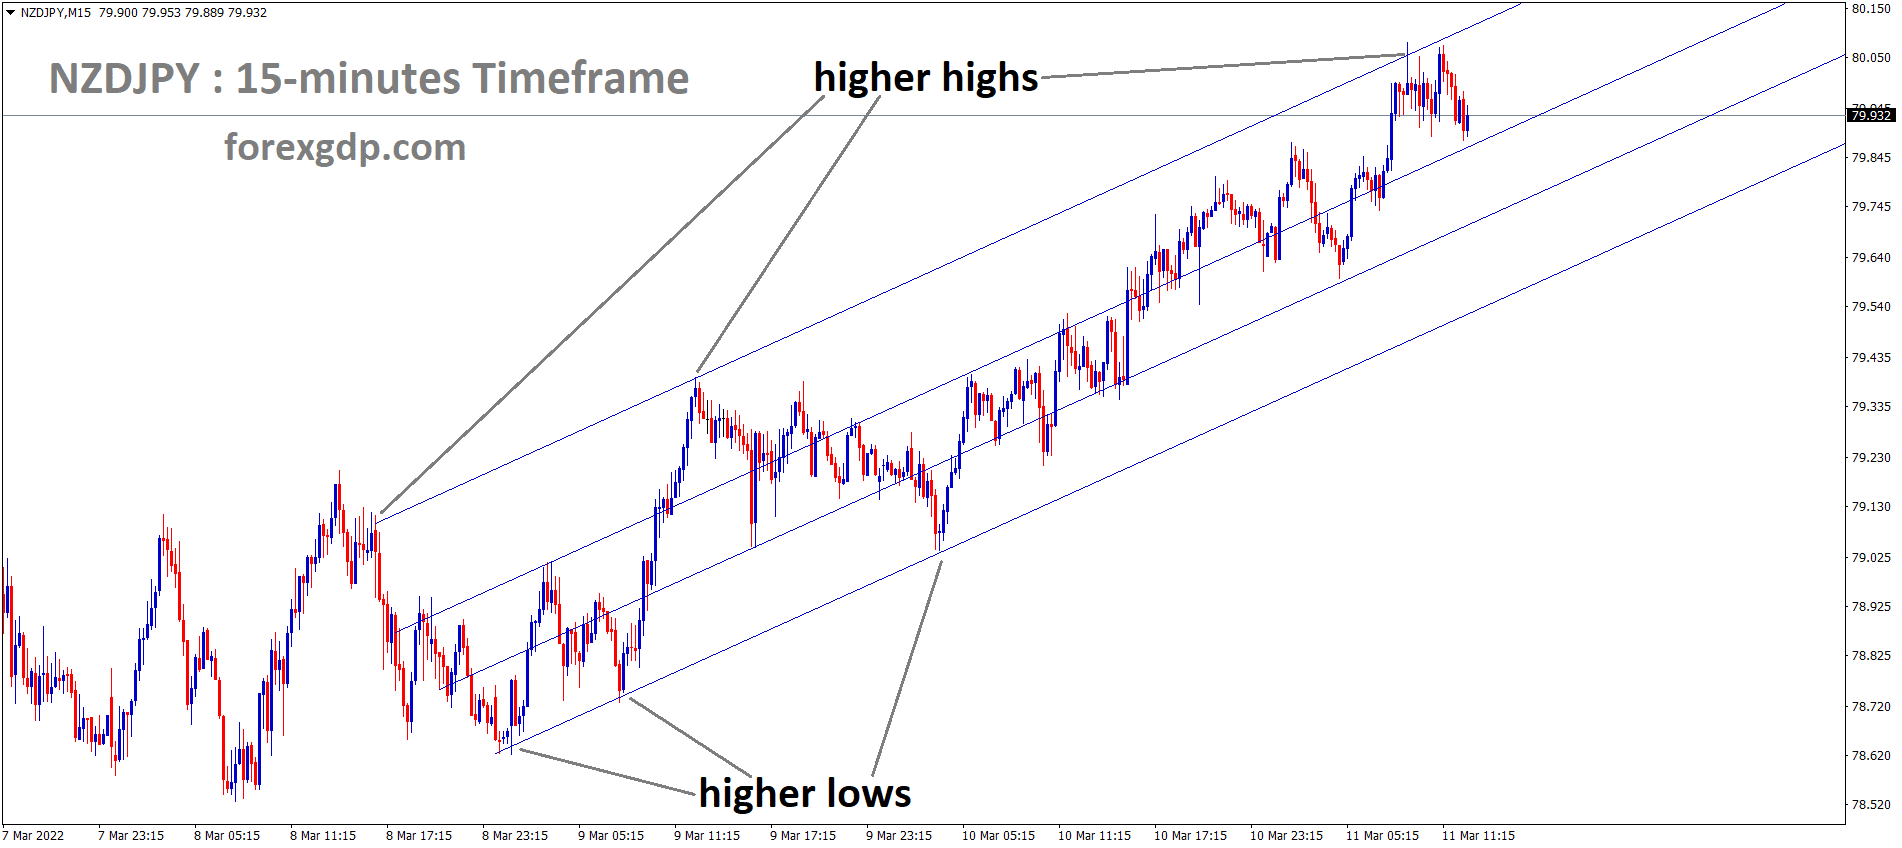 NZDJPY is moving in an Ascending channel and the market has reached the higher low area of the pattern